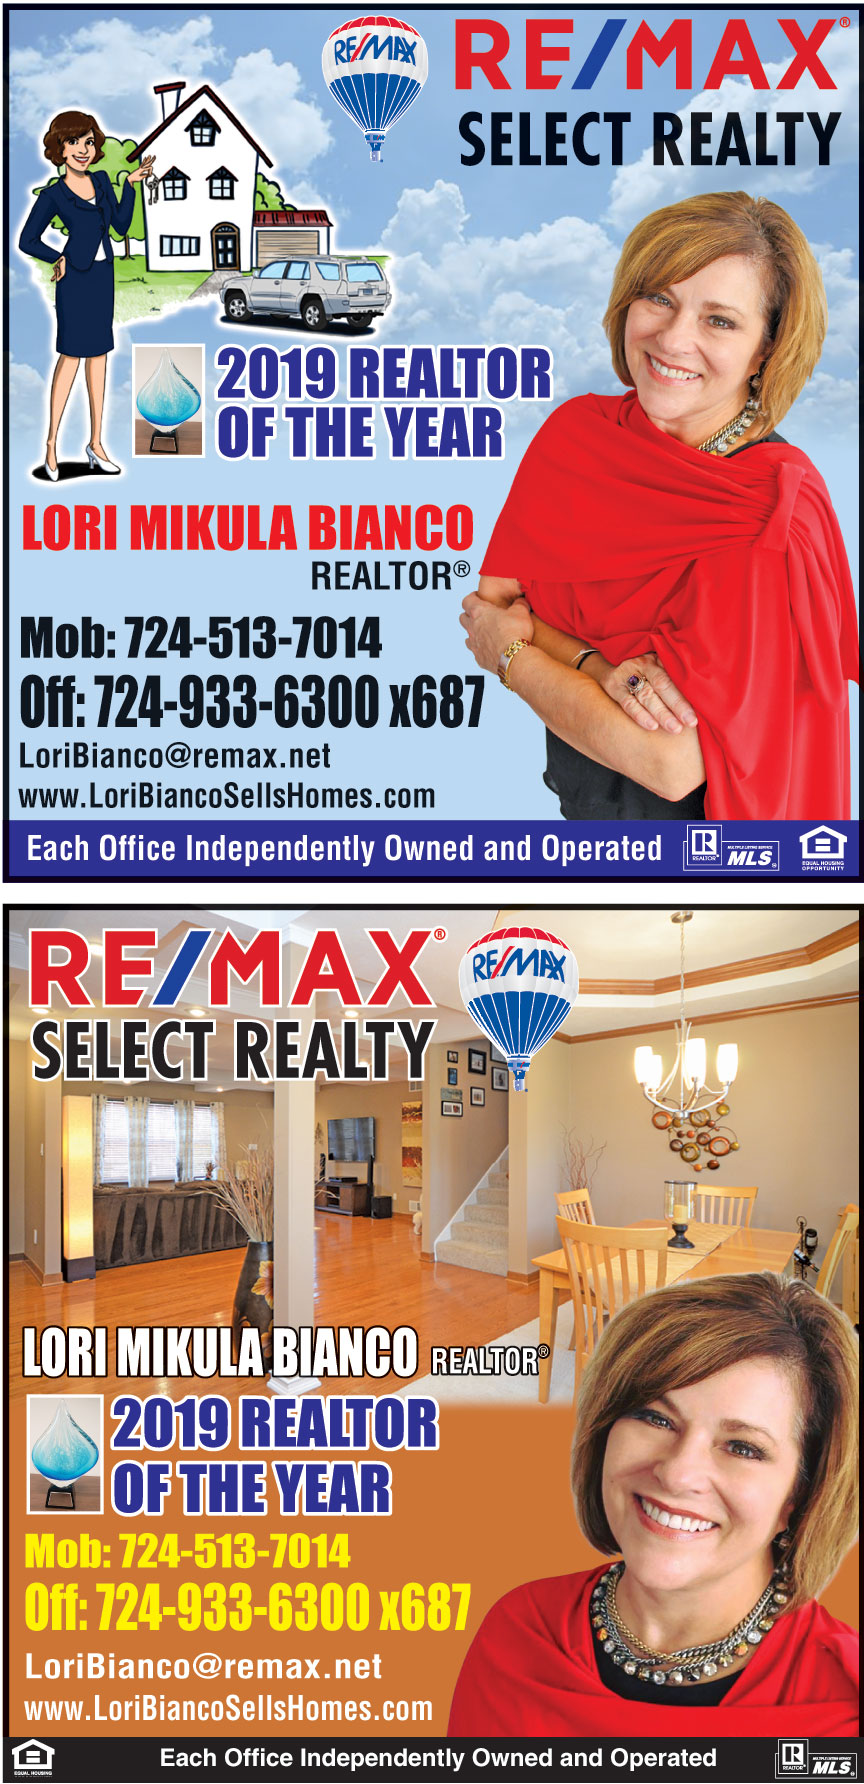 REMAX SELECT REALTY